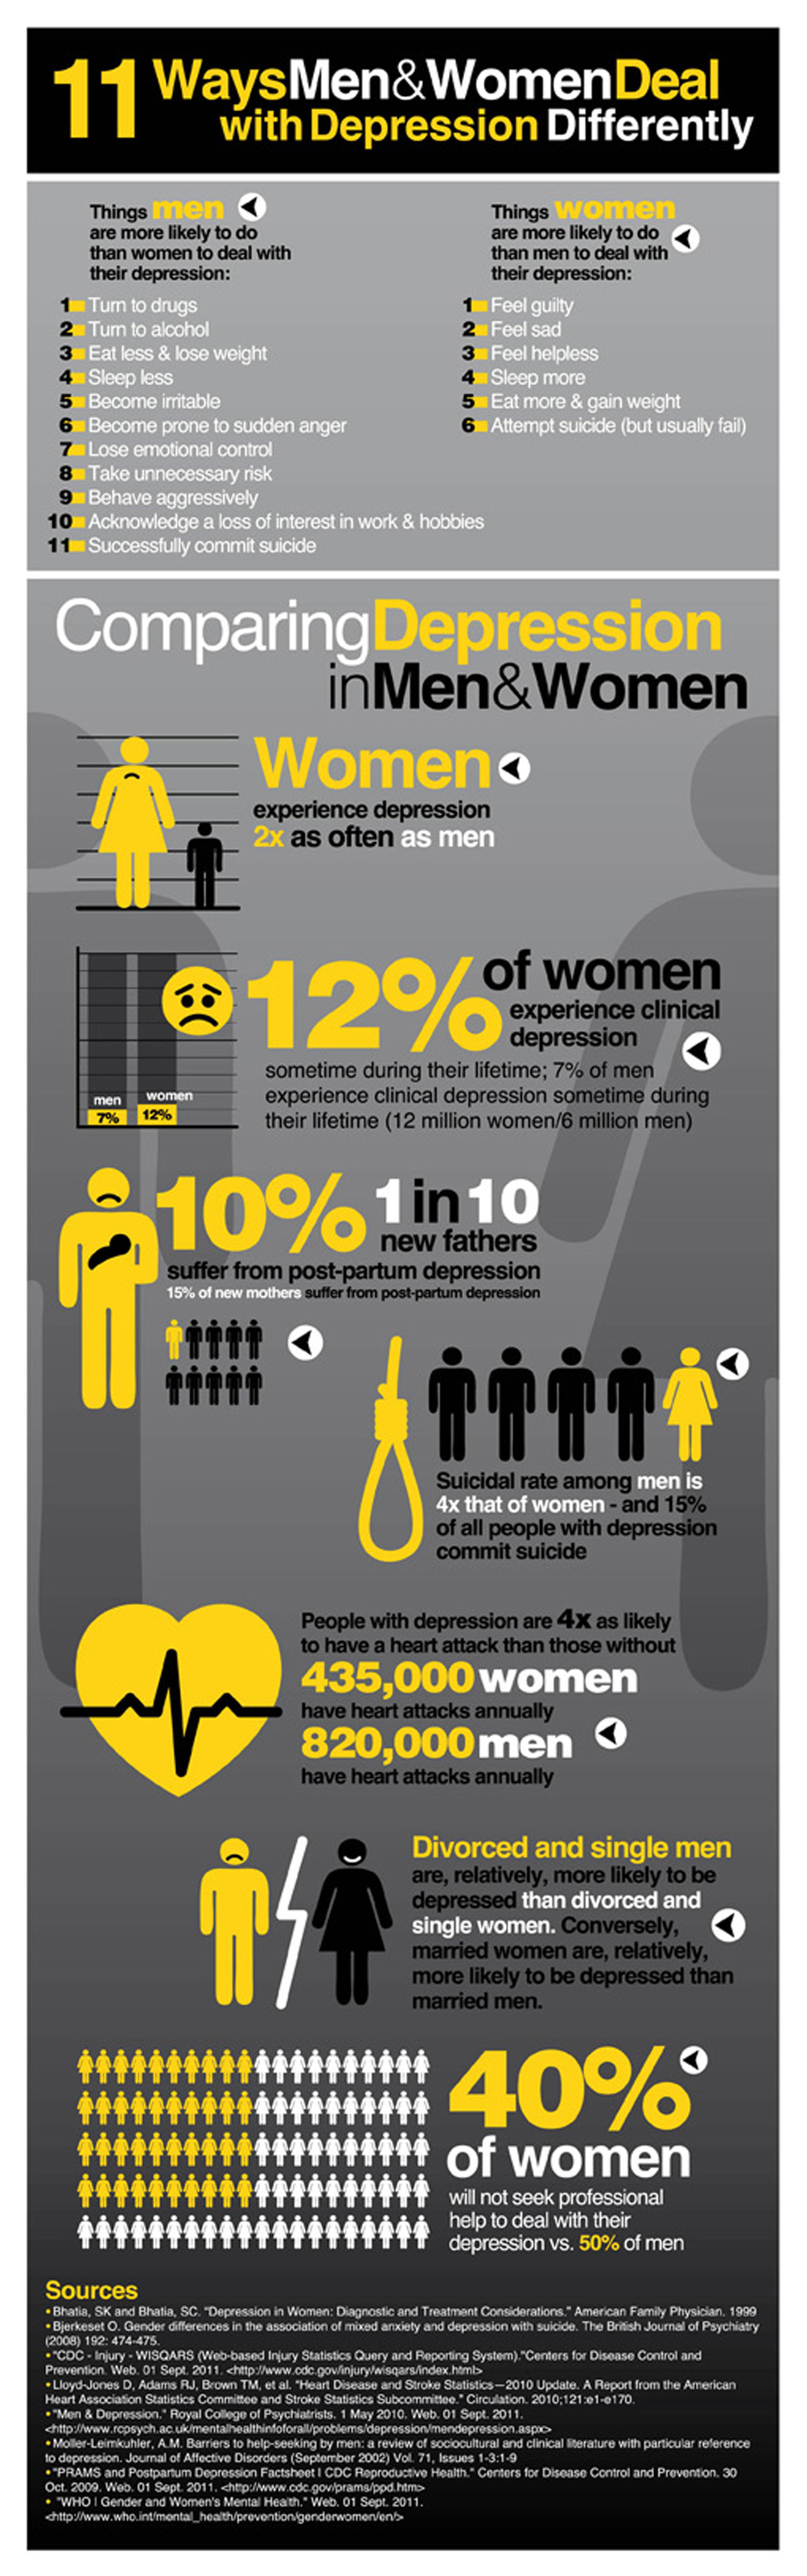 11 Ways Men & Women Deal with Depression Differently Infographic